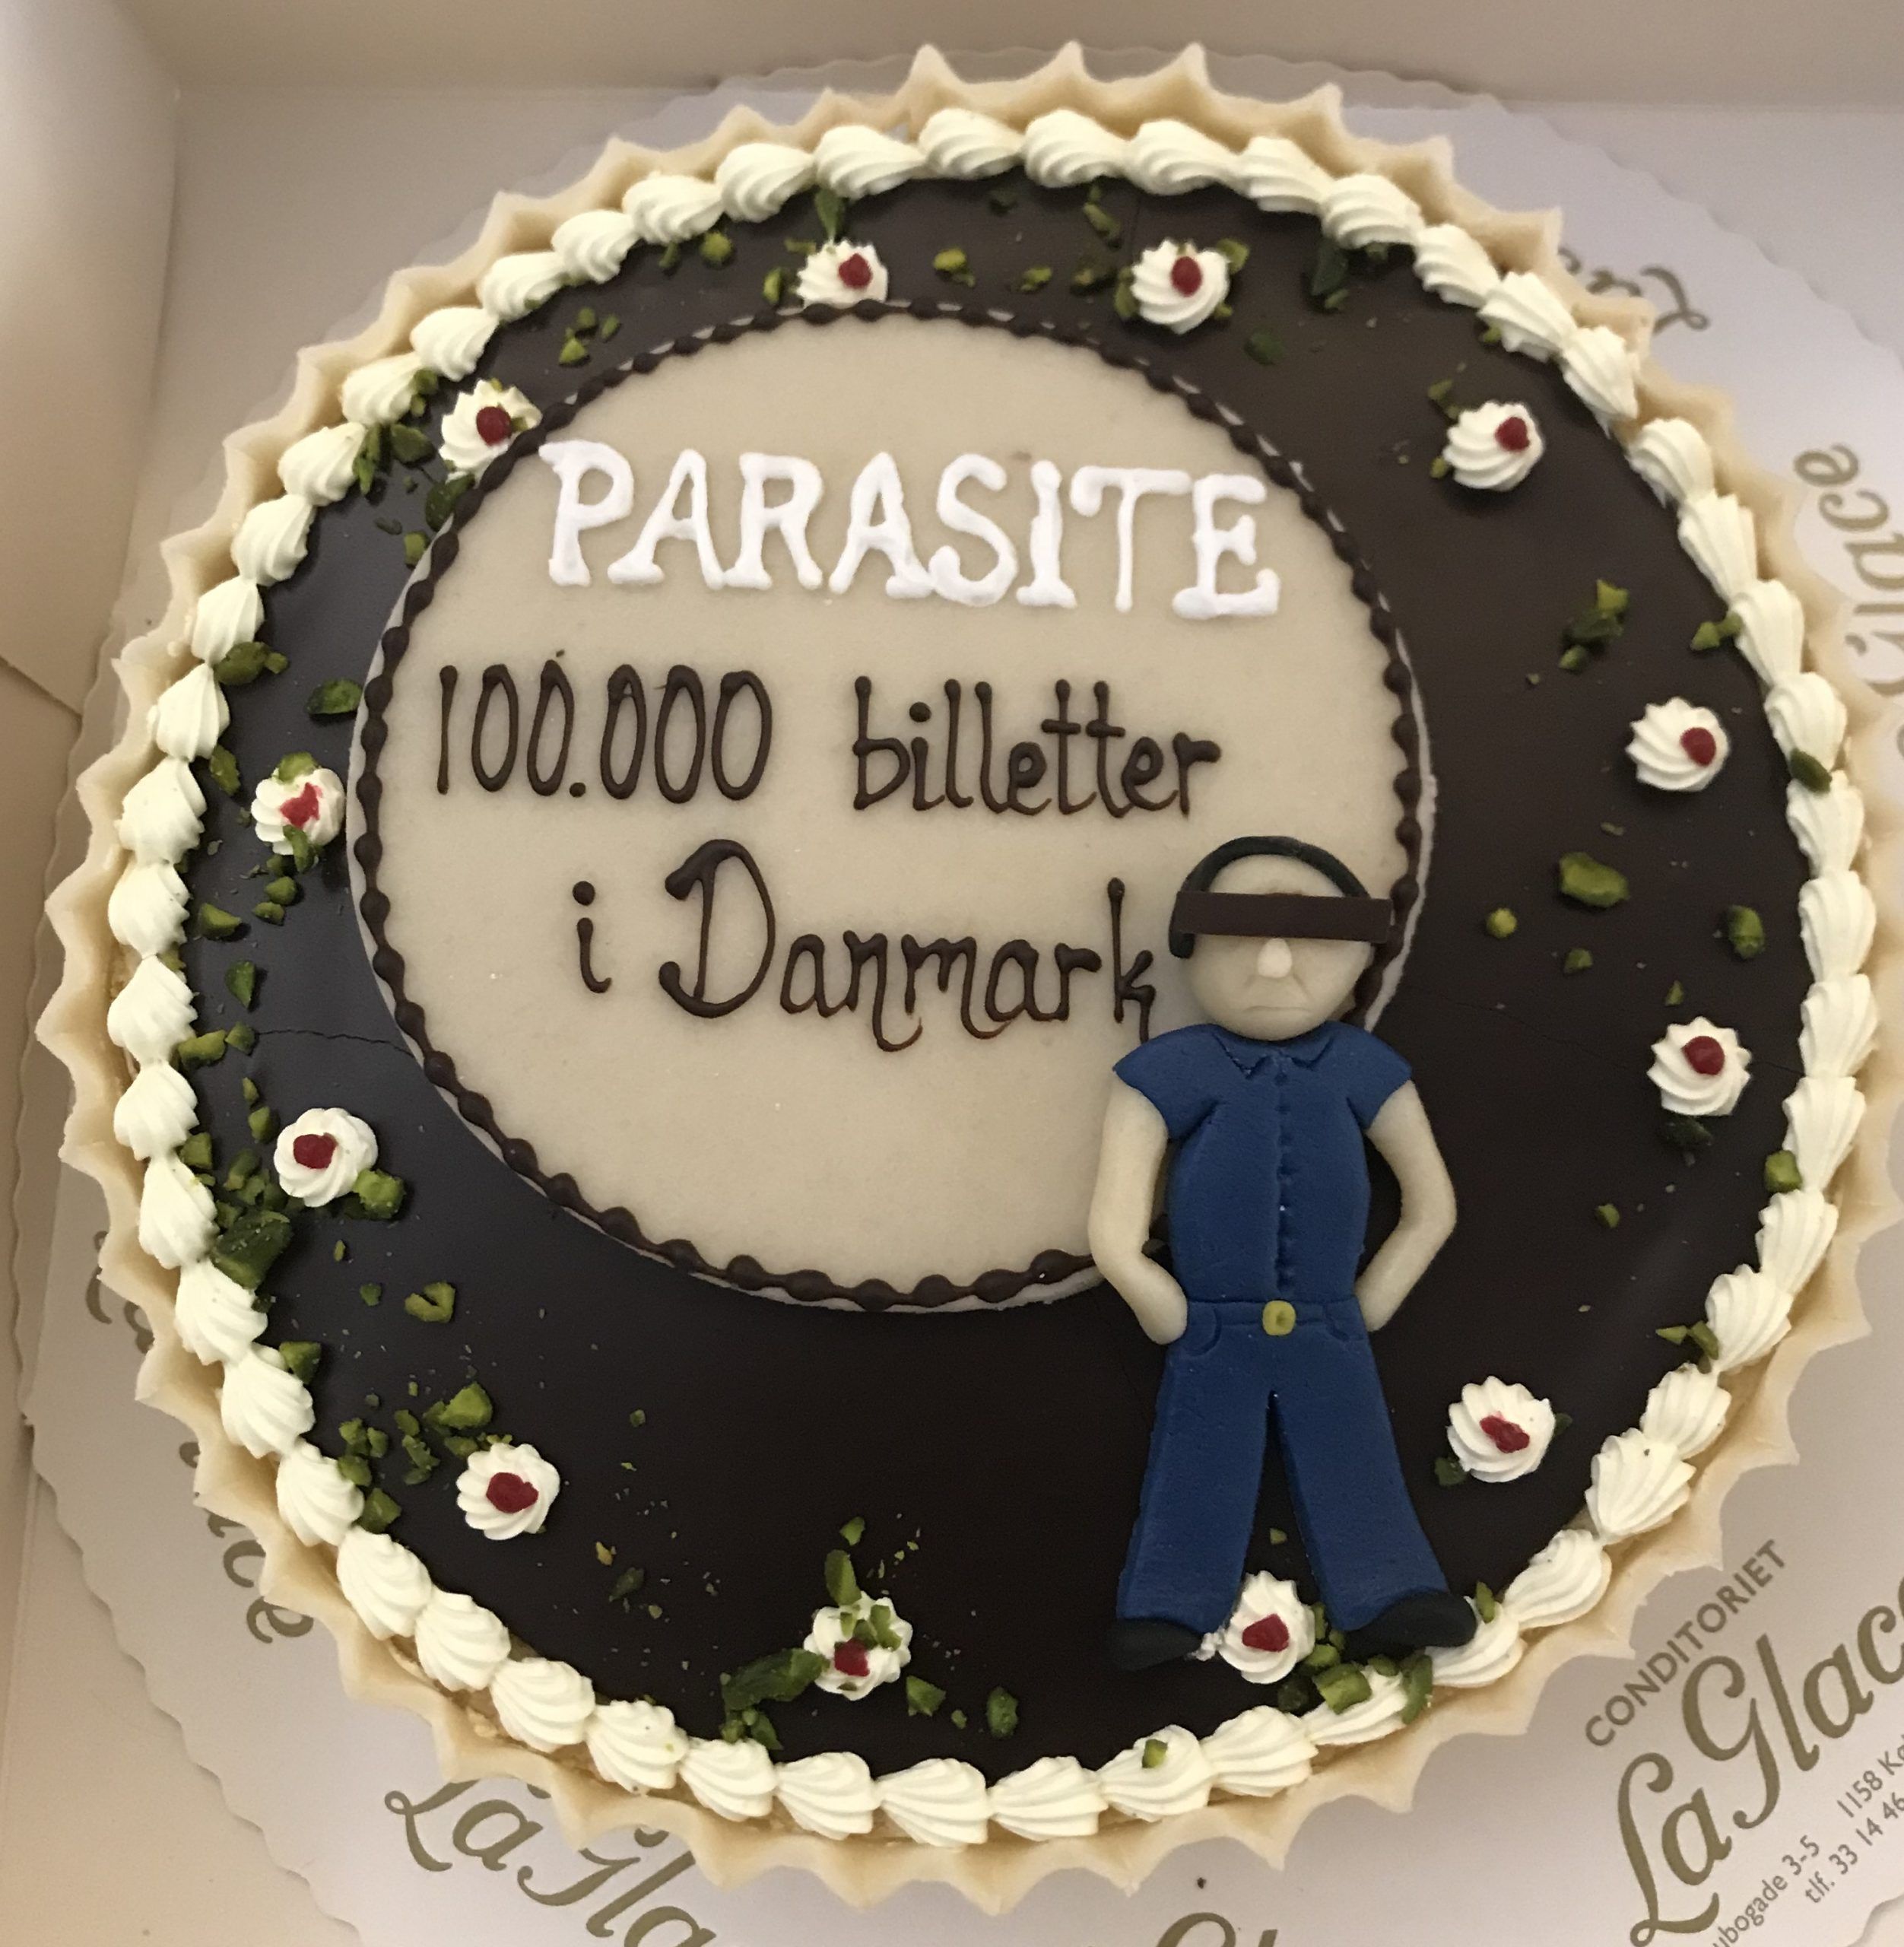 Culture Round-Up: Parasite recipe really takes the cake